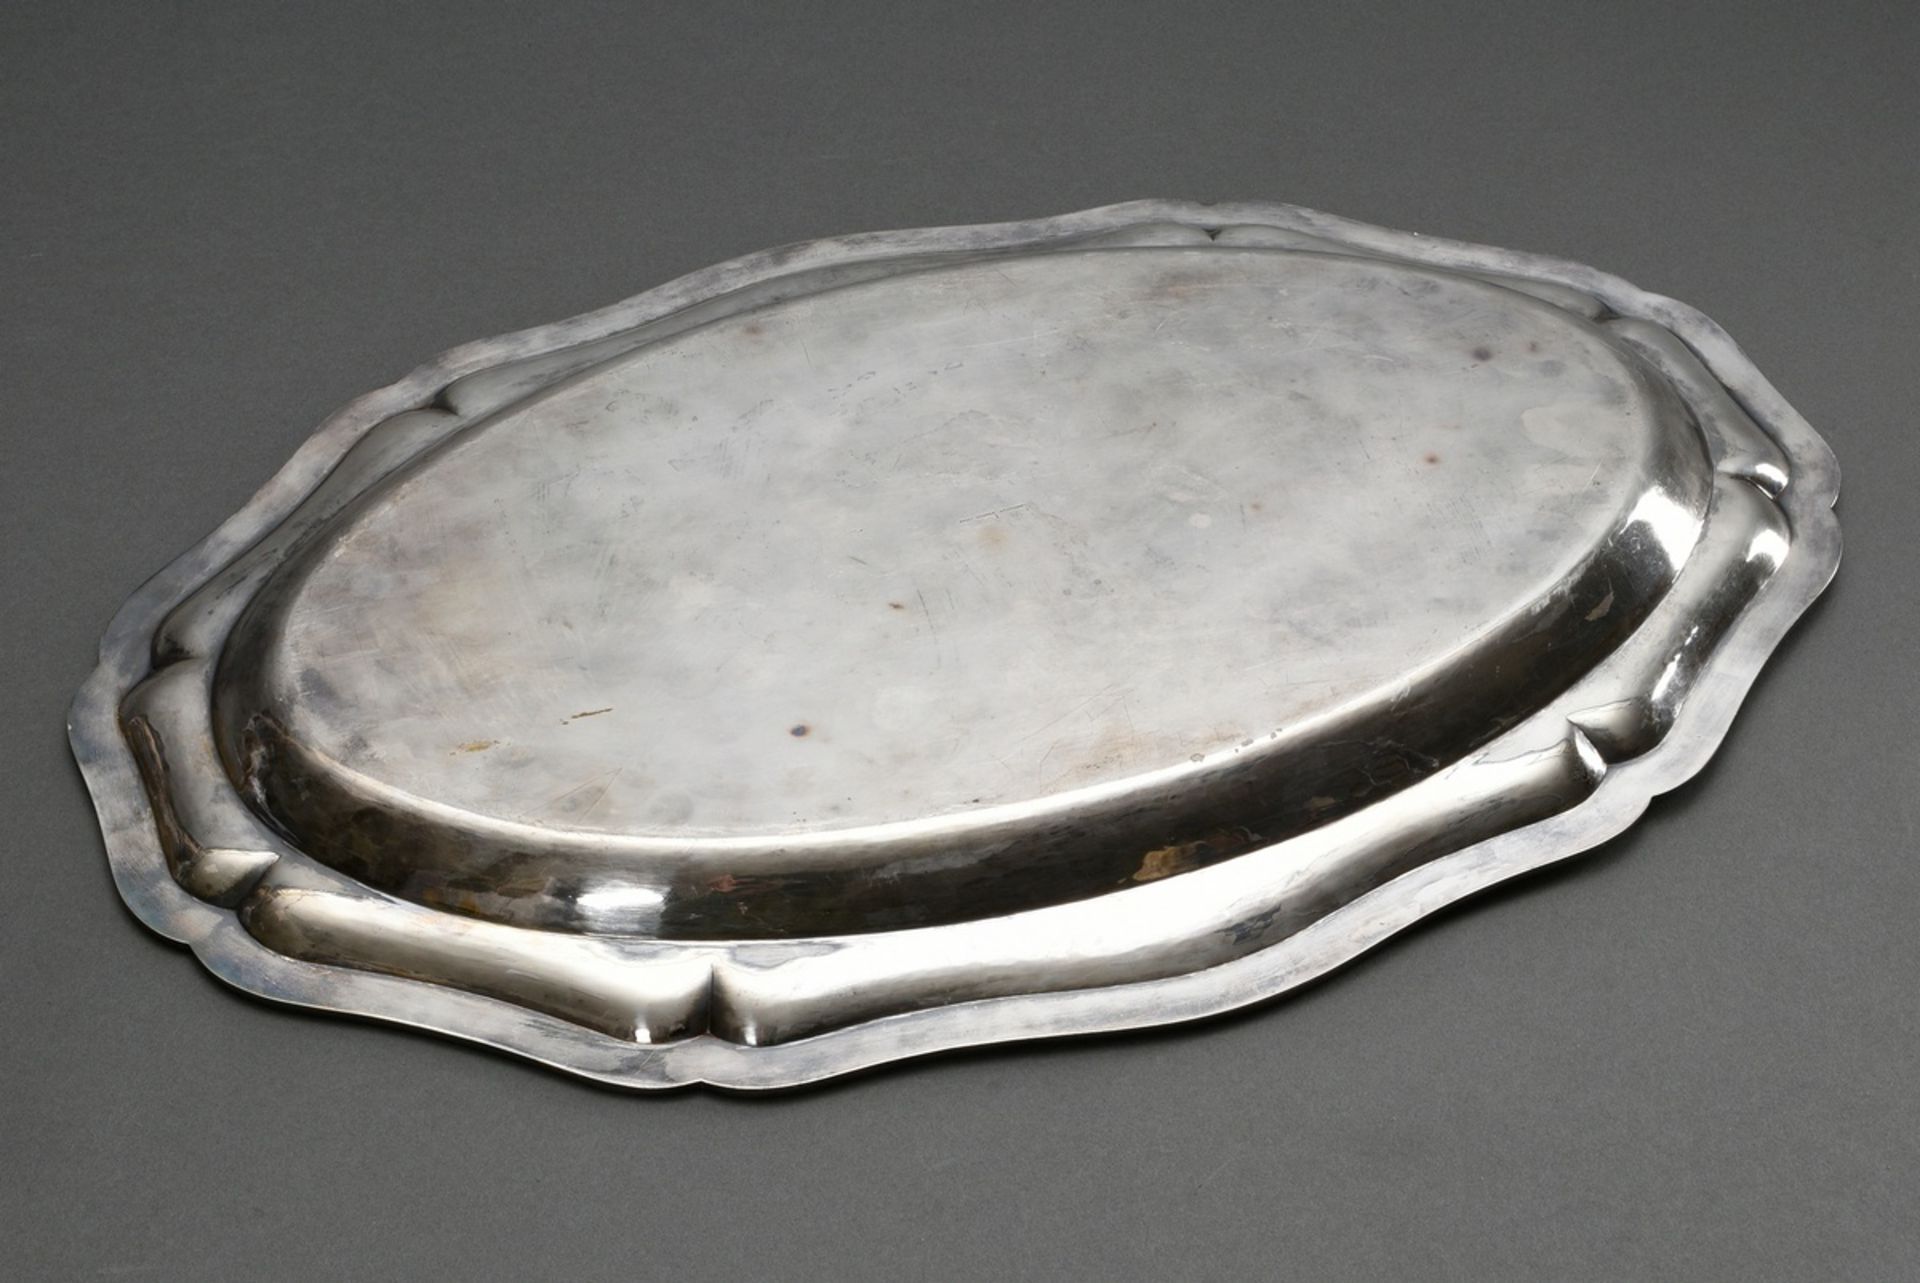 Large oval plate with chippendale rim and monogram "F", MM: Ernst Mehner/Stuttgart, silver 800, 212 - Image 4 of 4